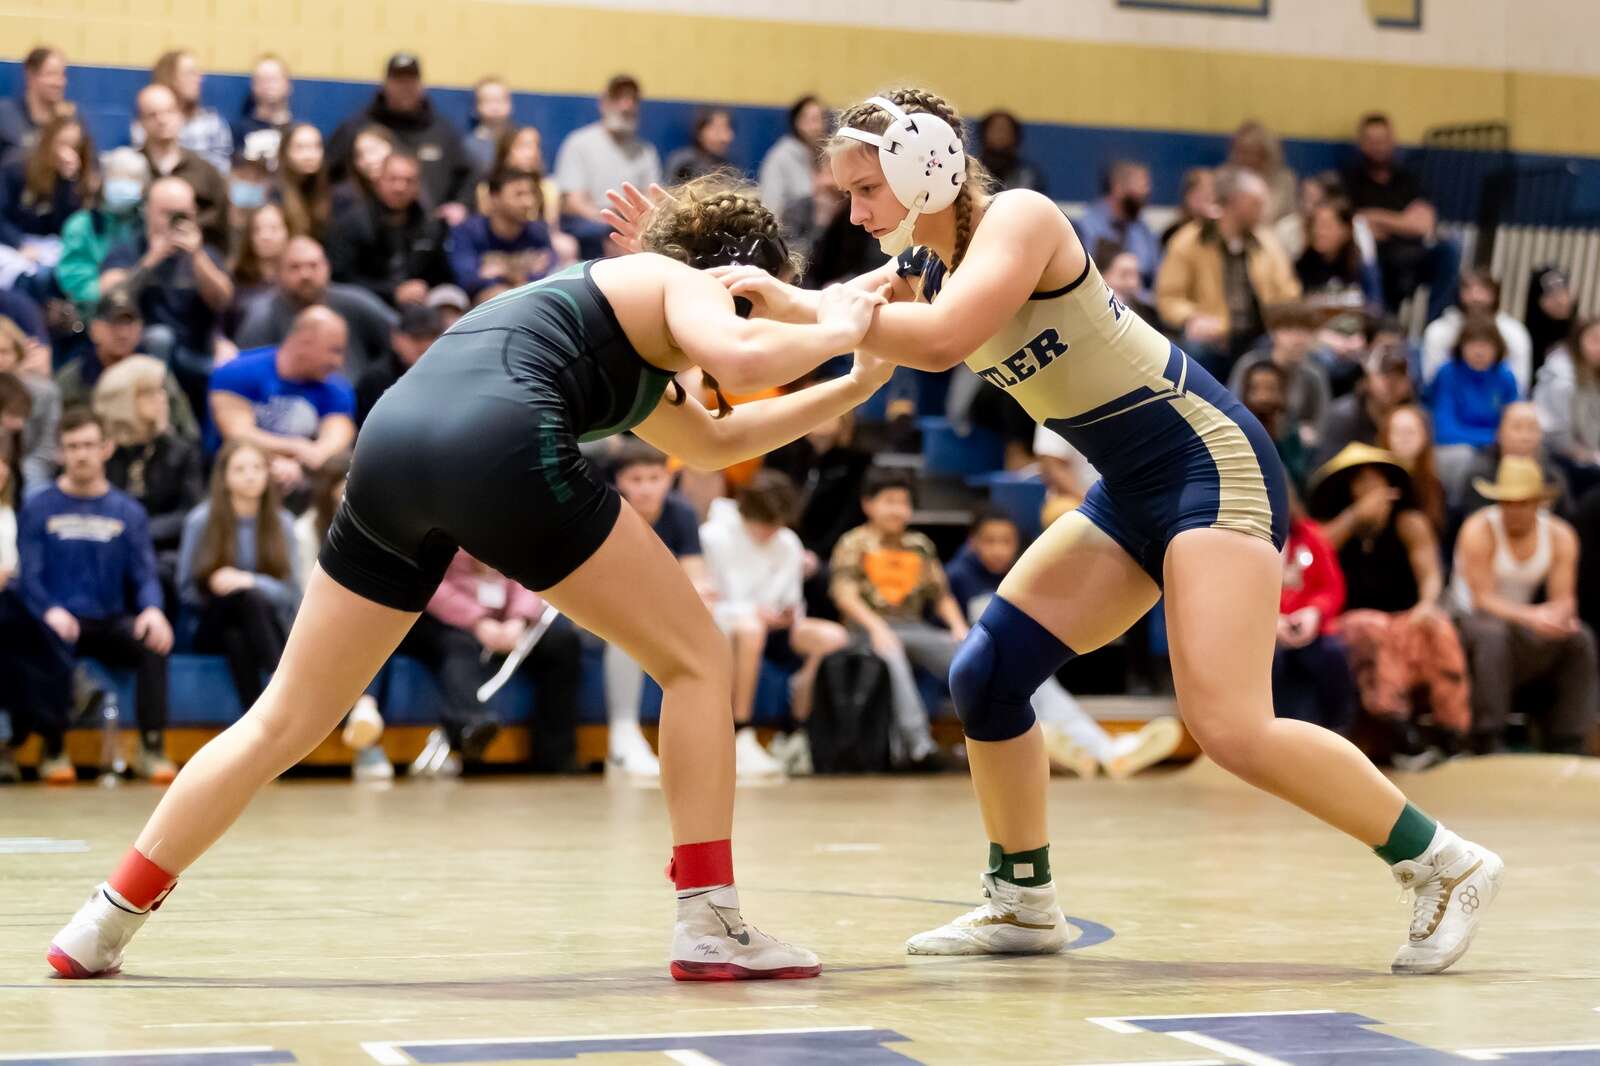 Butler's Anastasia Manchester grapples with Pine-Richland's Jarah Casciani